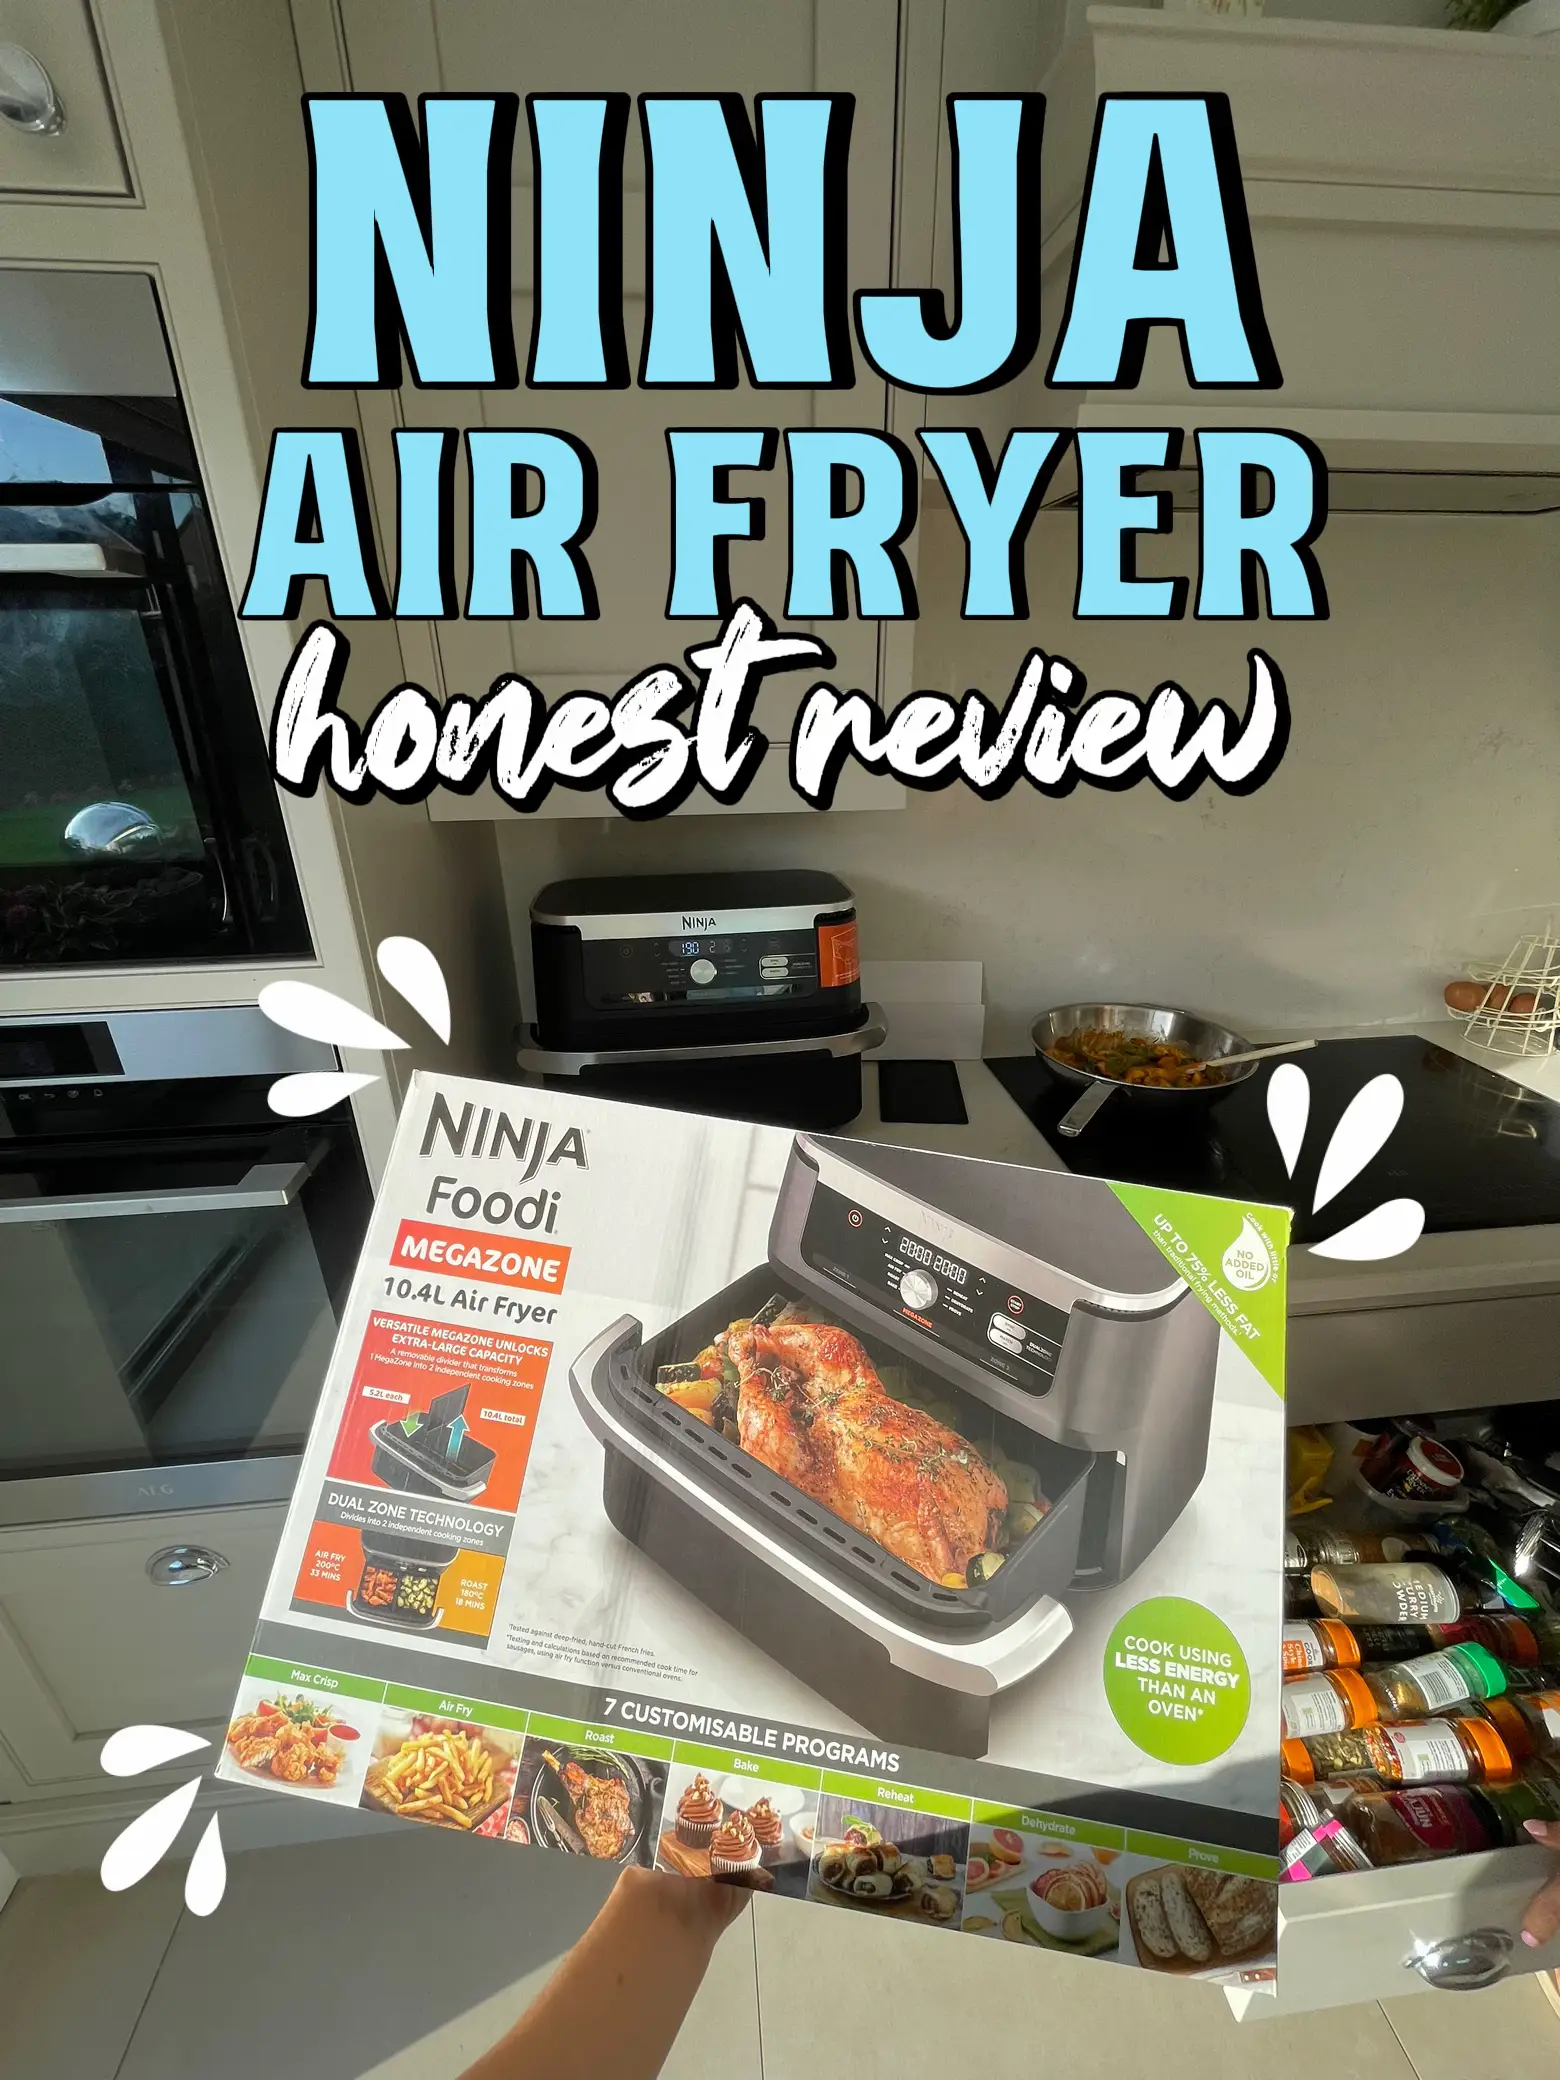 Is the Ninja Air Fryer Max XL Worth Buying? My Honest Review After